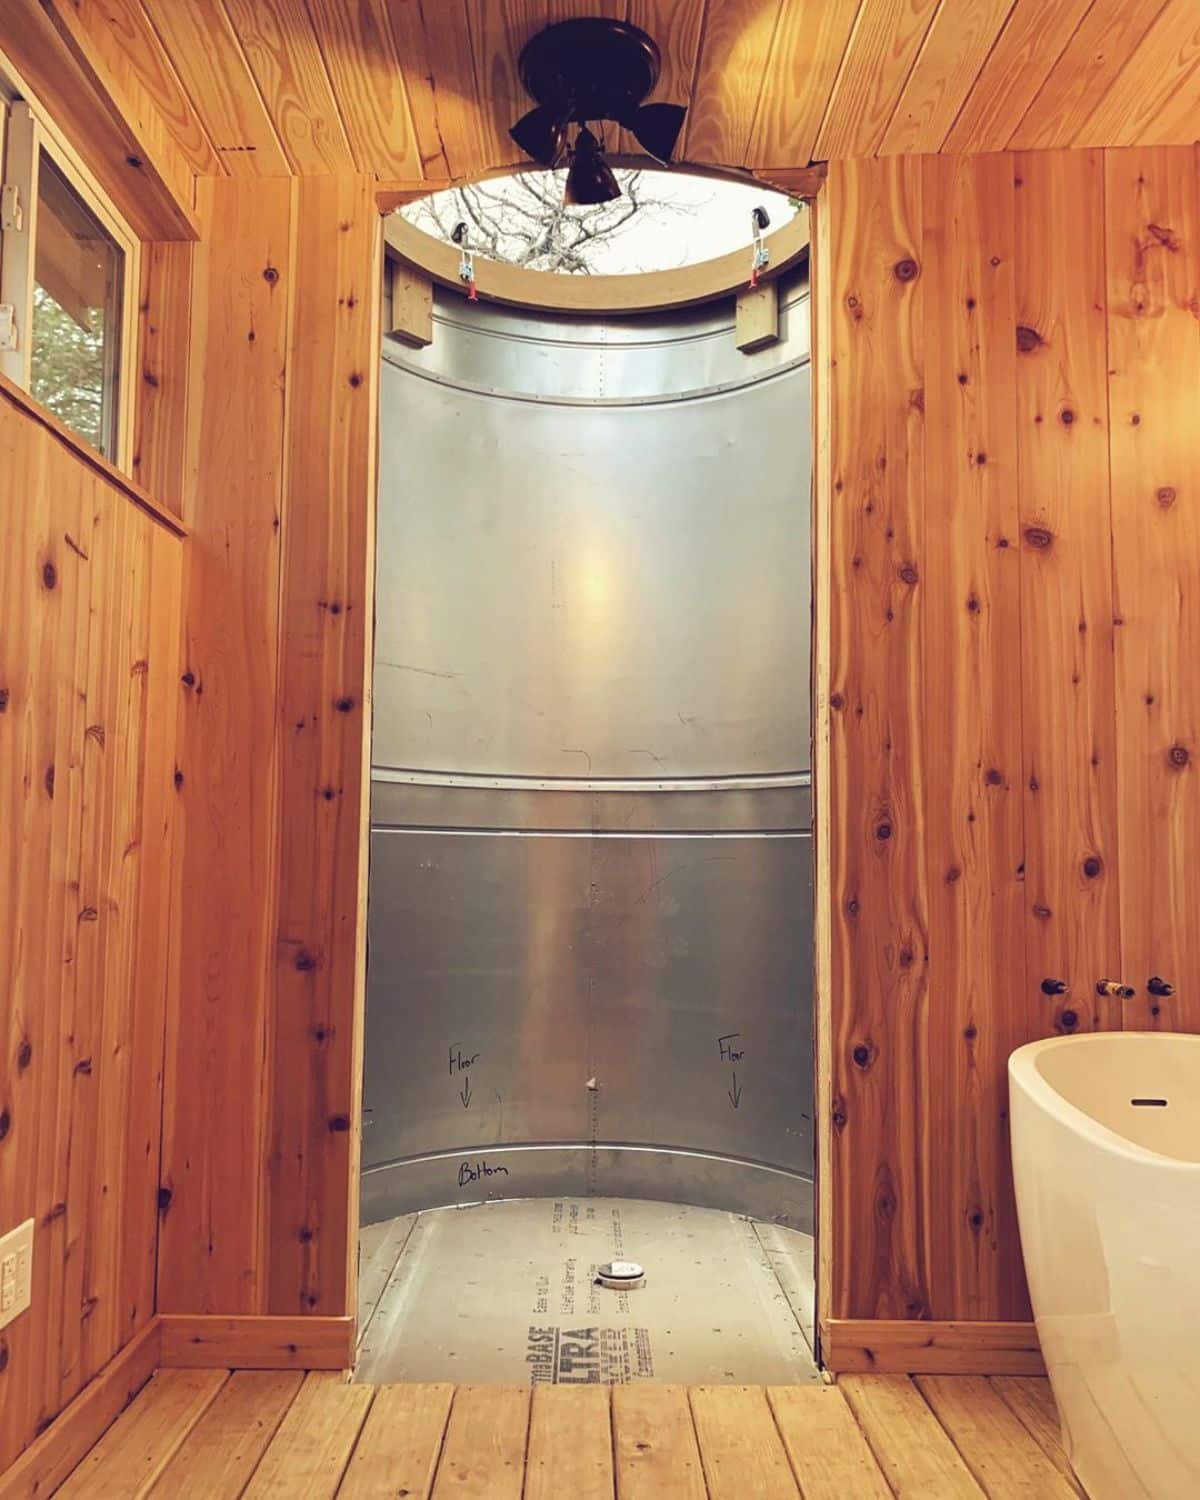 corrugated metal round shower at end of bathroom with white bathtub on right